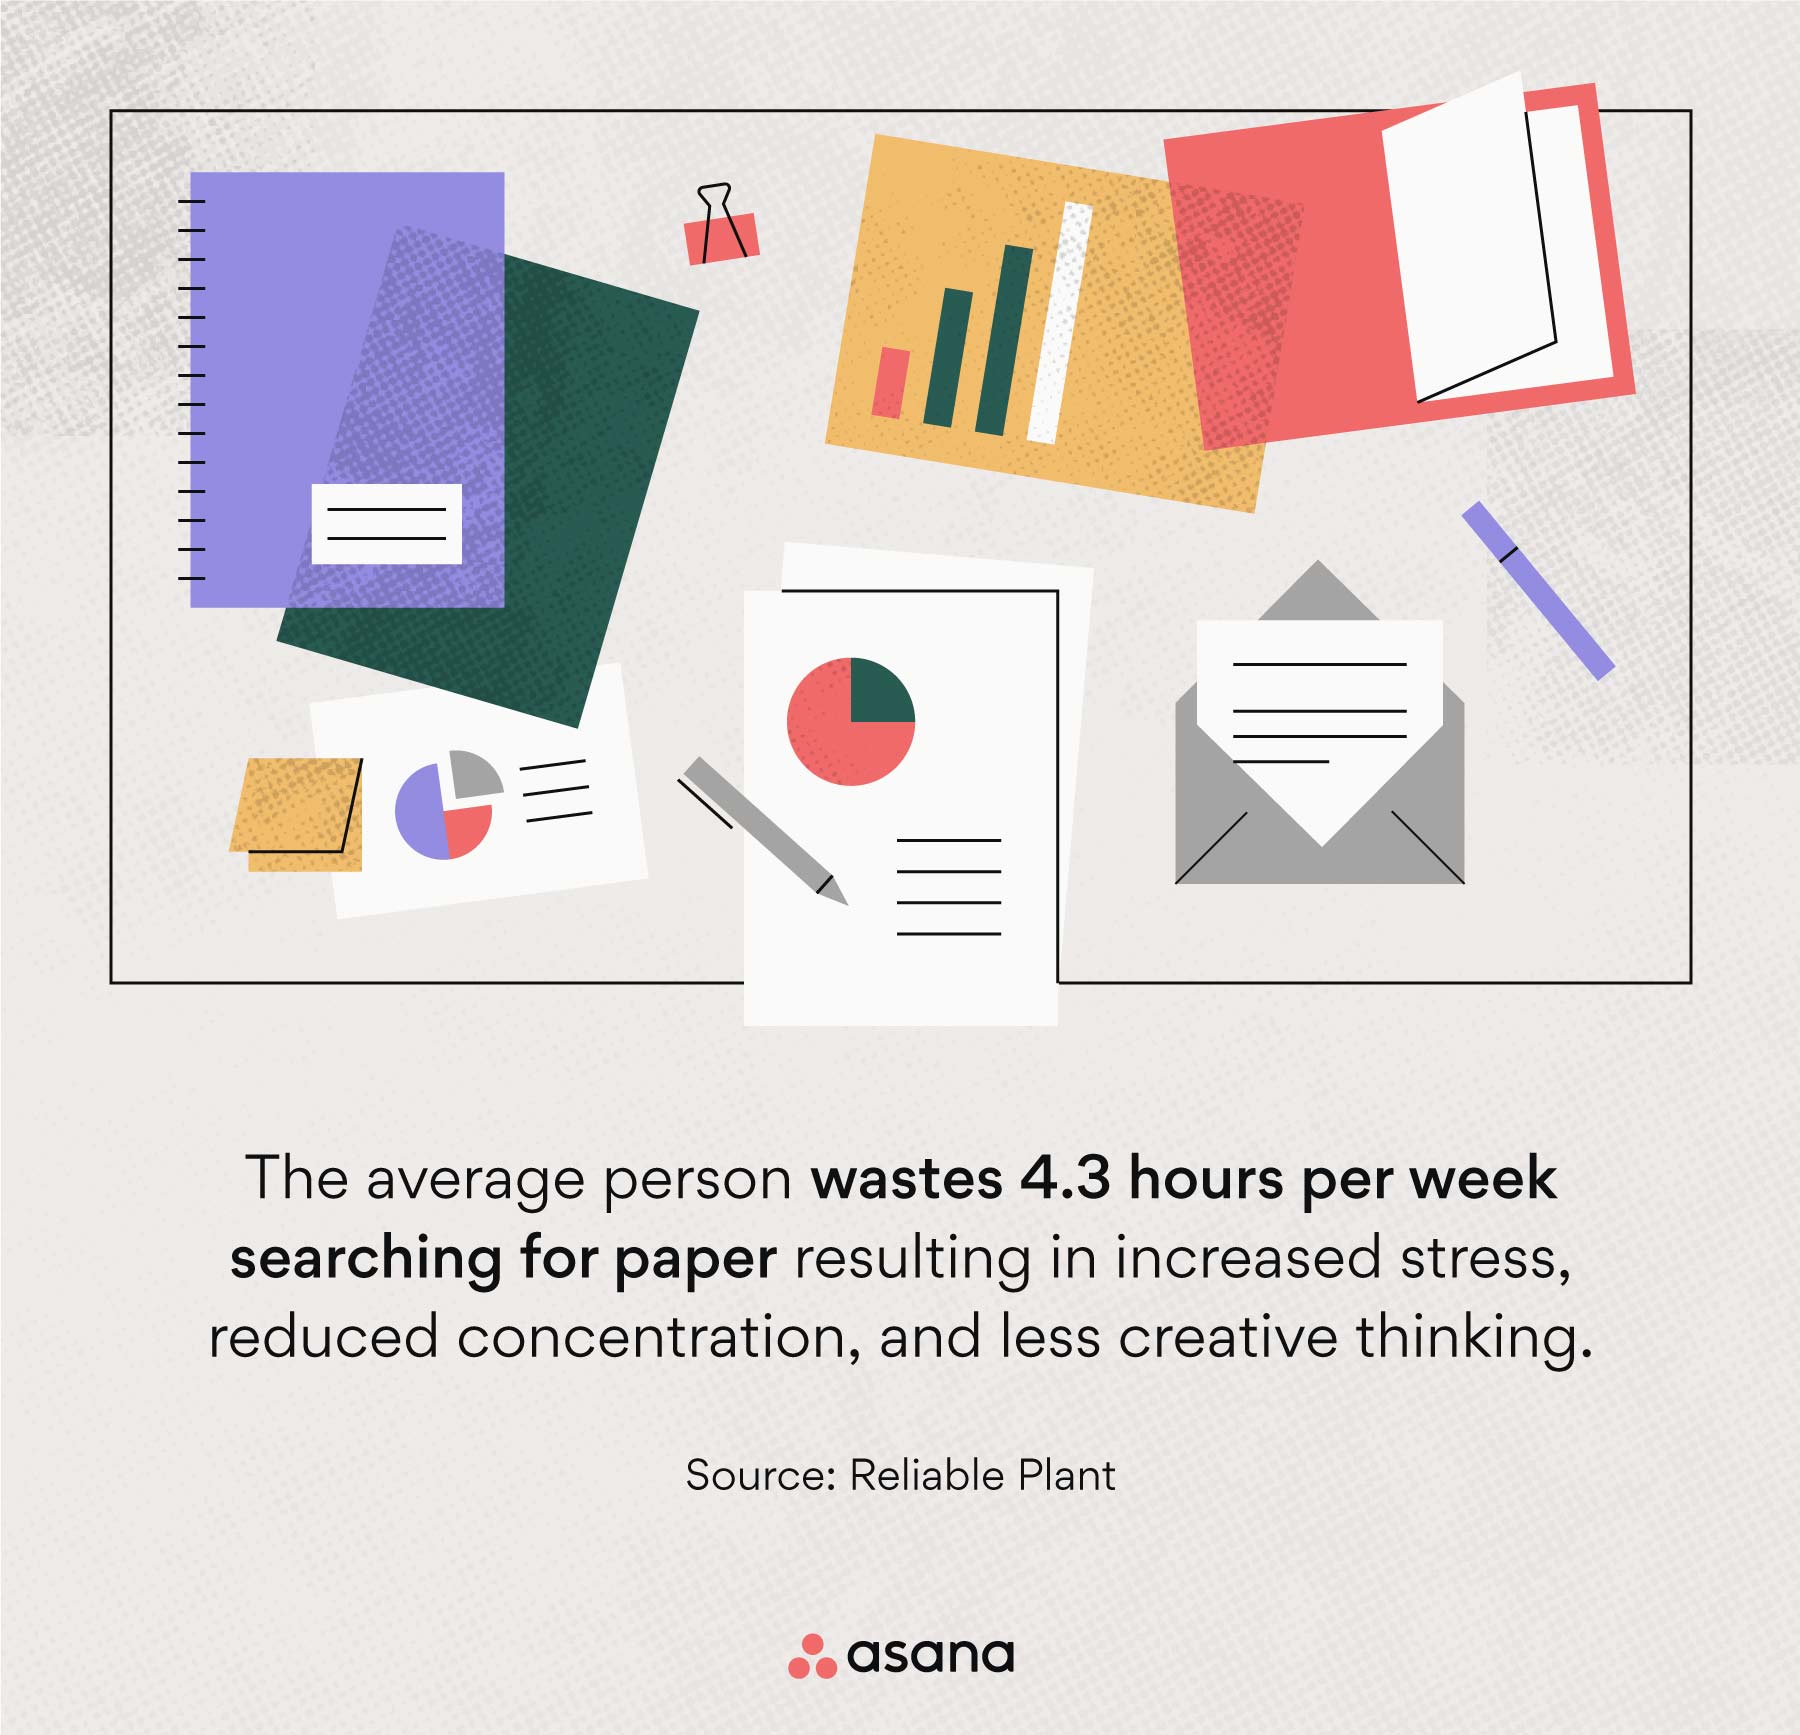 the average person wastes 4.3 hours per week searching for paper